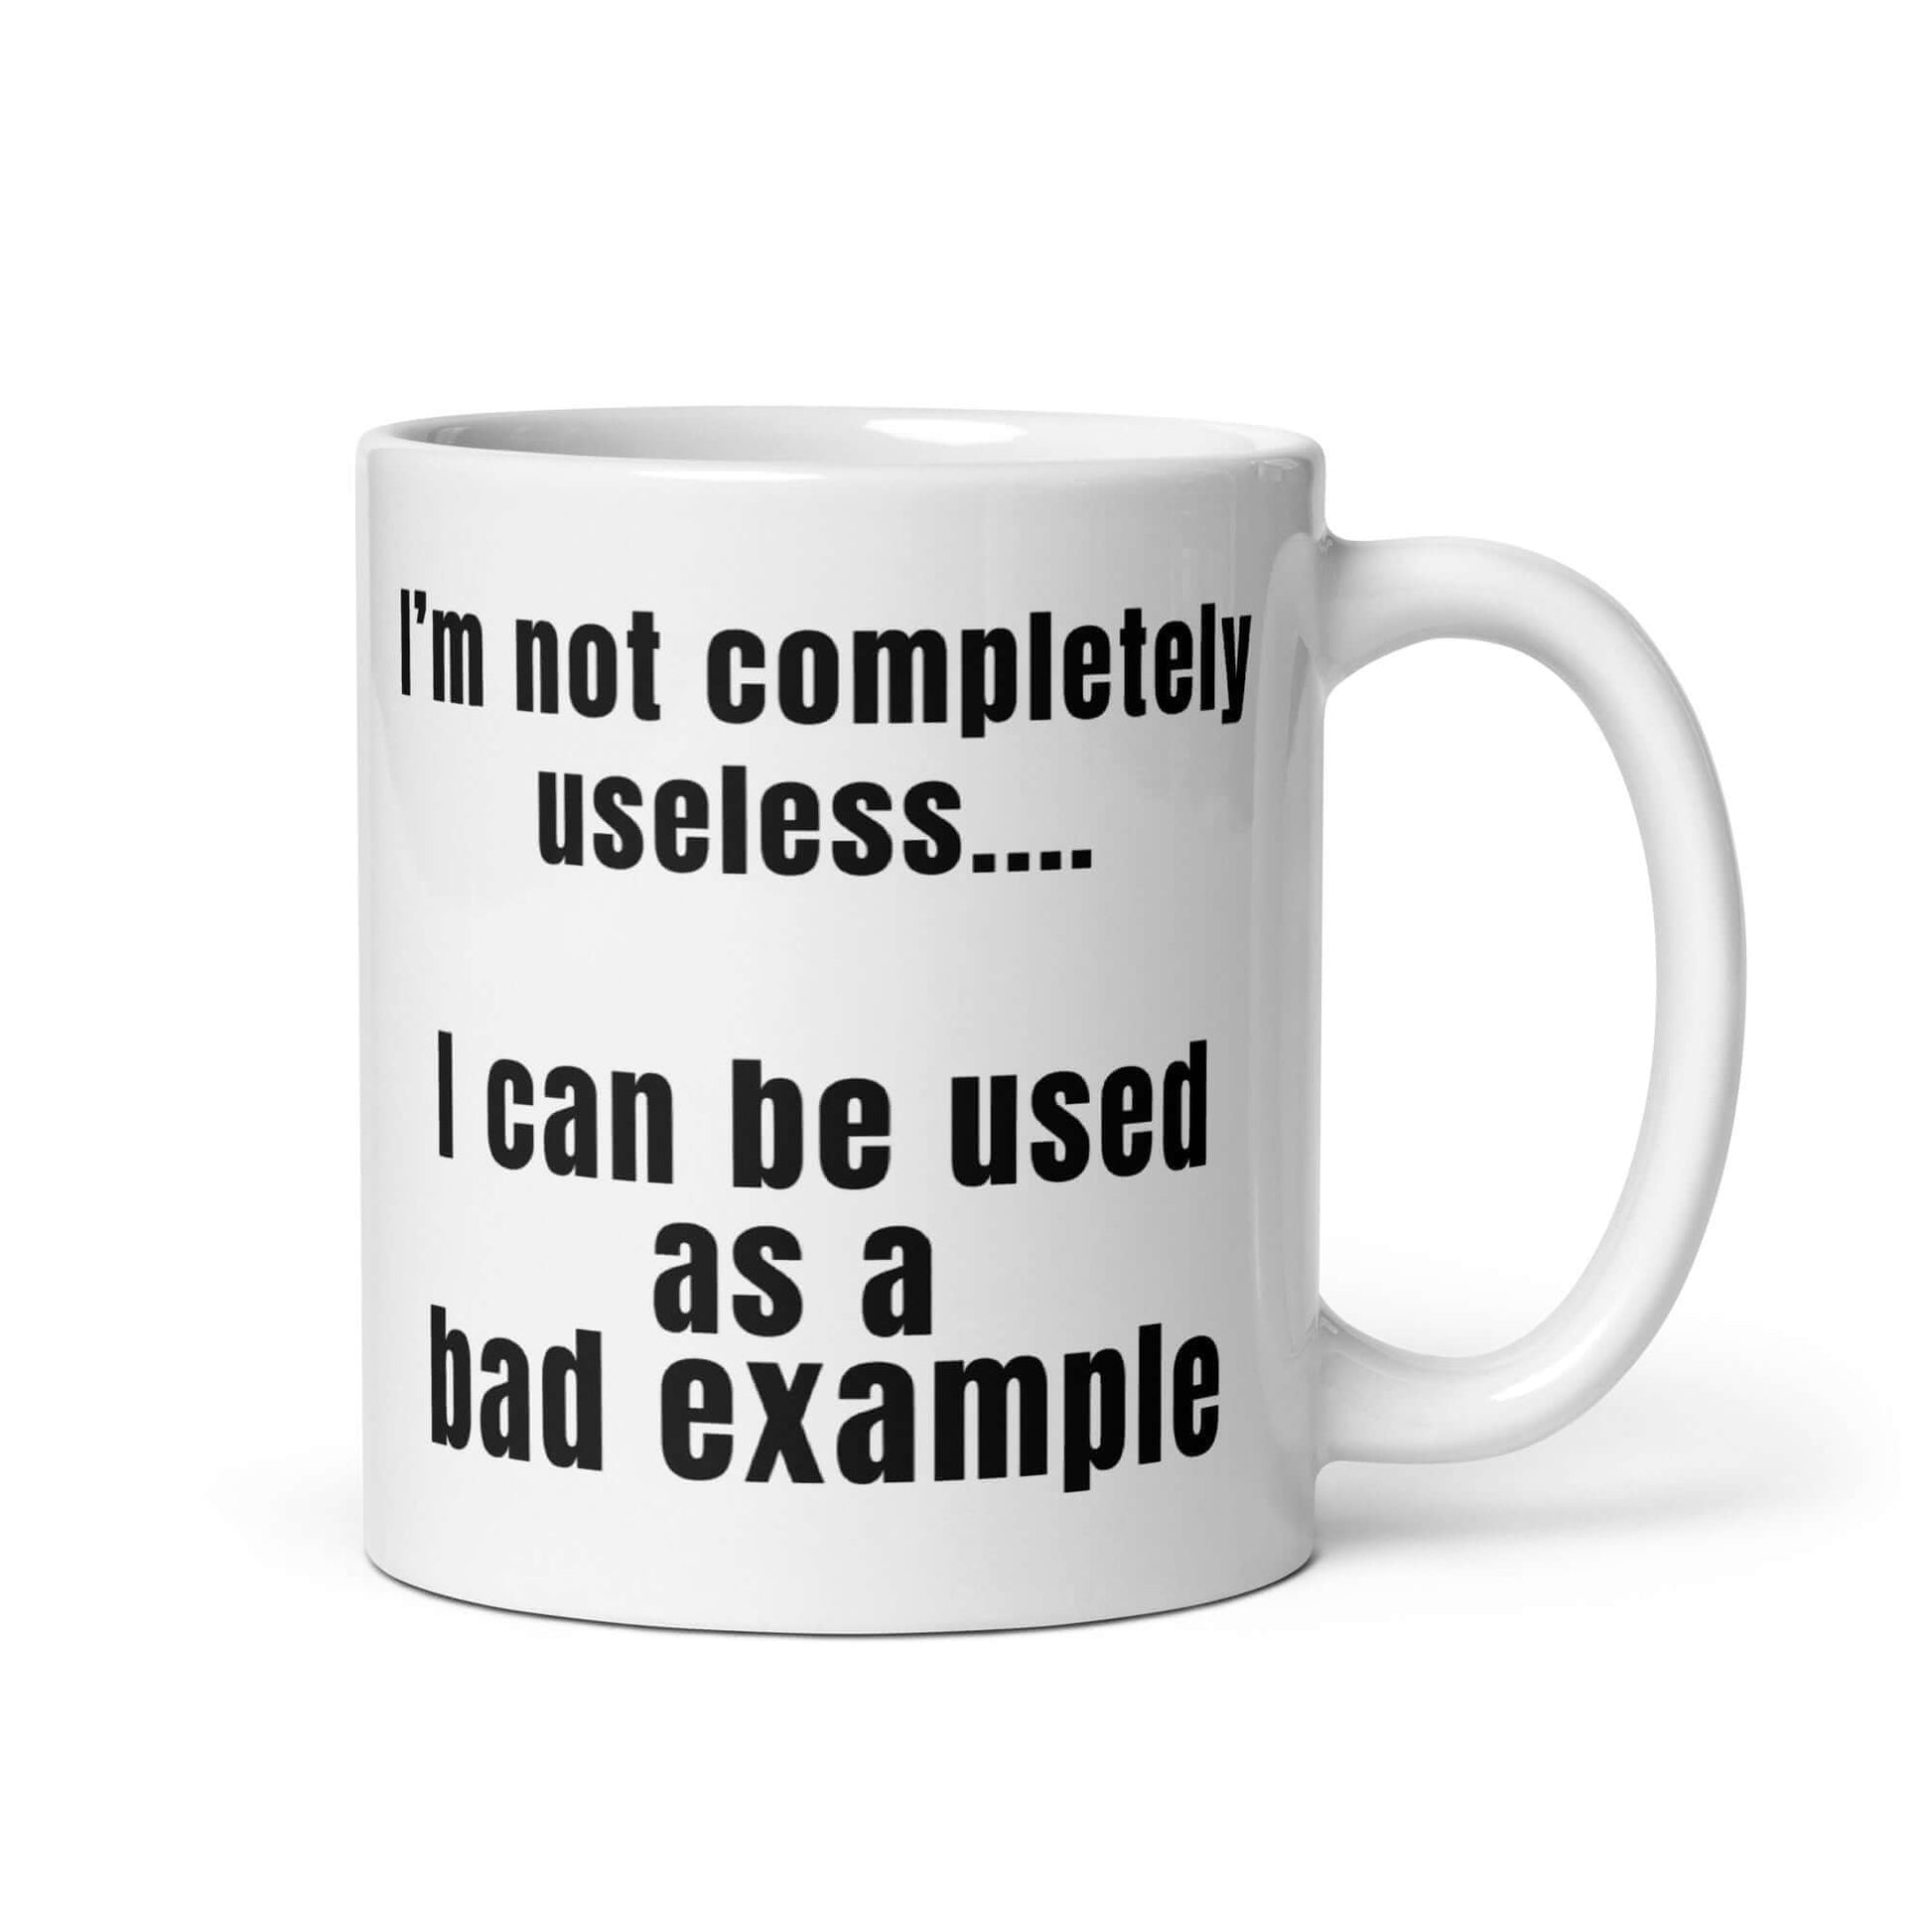 I'm not completely useless.... I can be used as a bad example - White glossy mug bad example coffee mug dads day fathers day funny mug gift for dad gift for him gift for mom useless